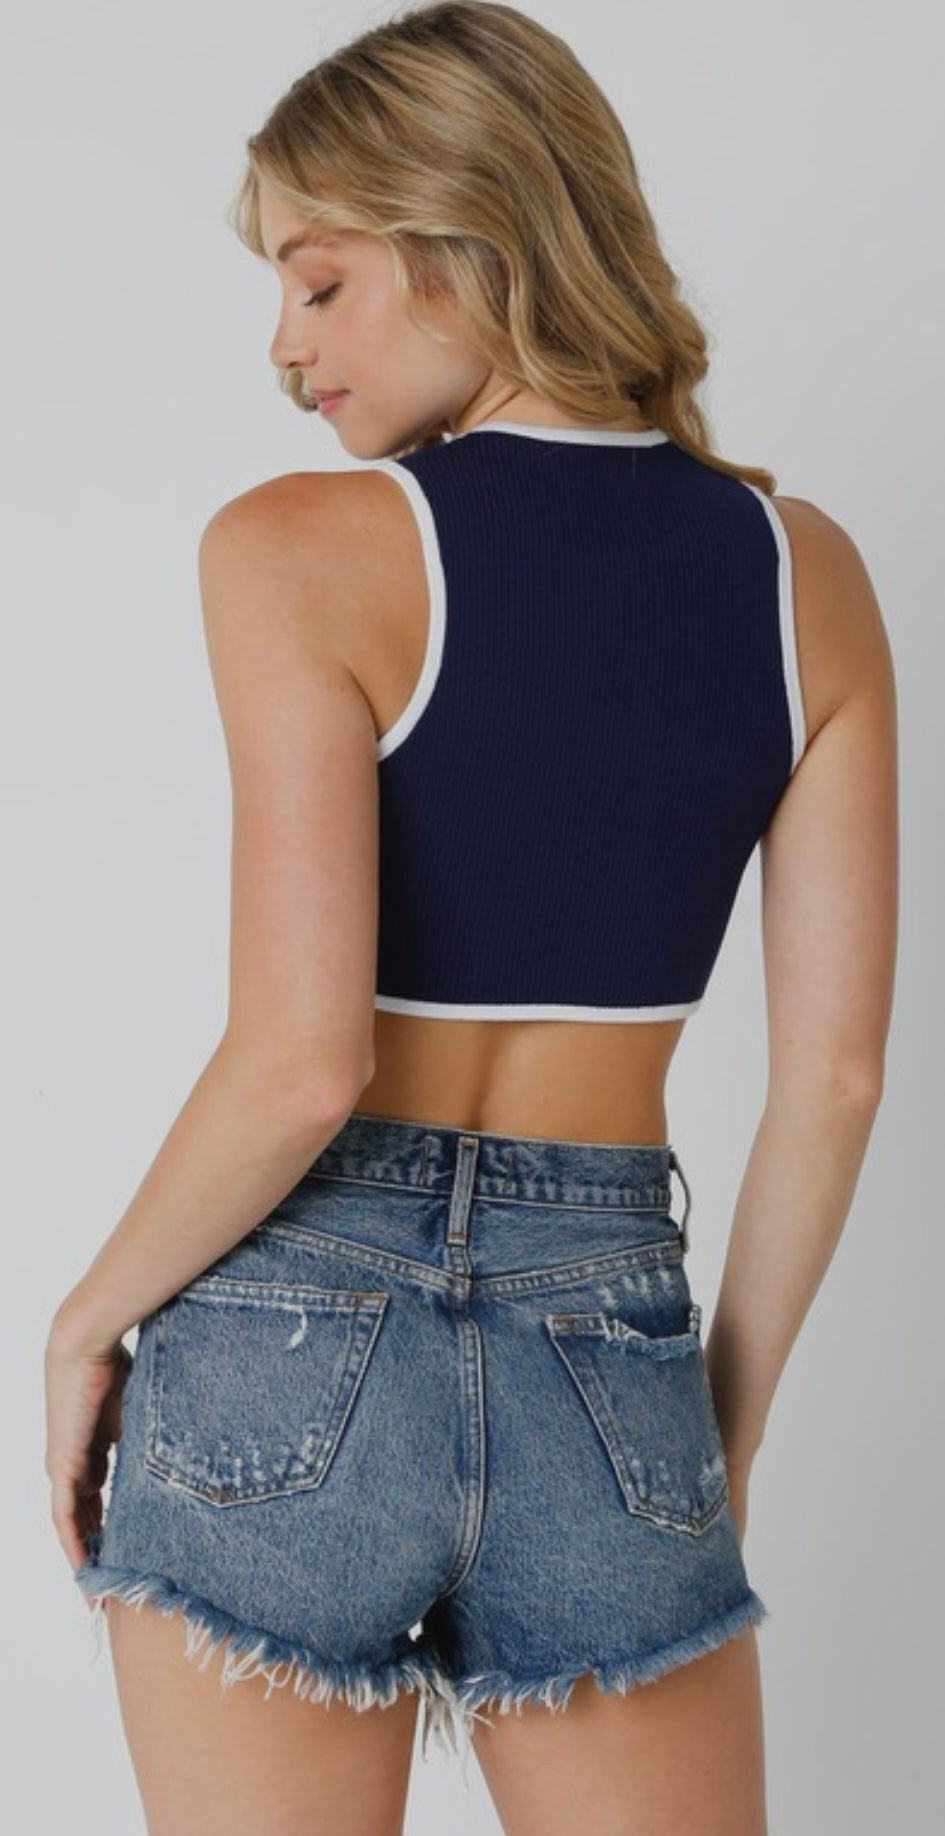 Crop tank with arch bottom and contrast trim (2 colors) New colors in top selling style!